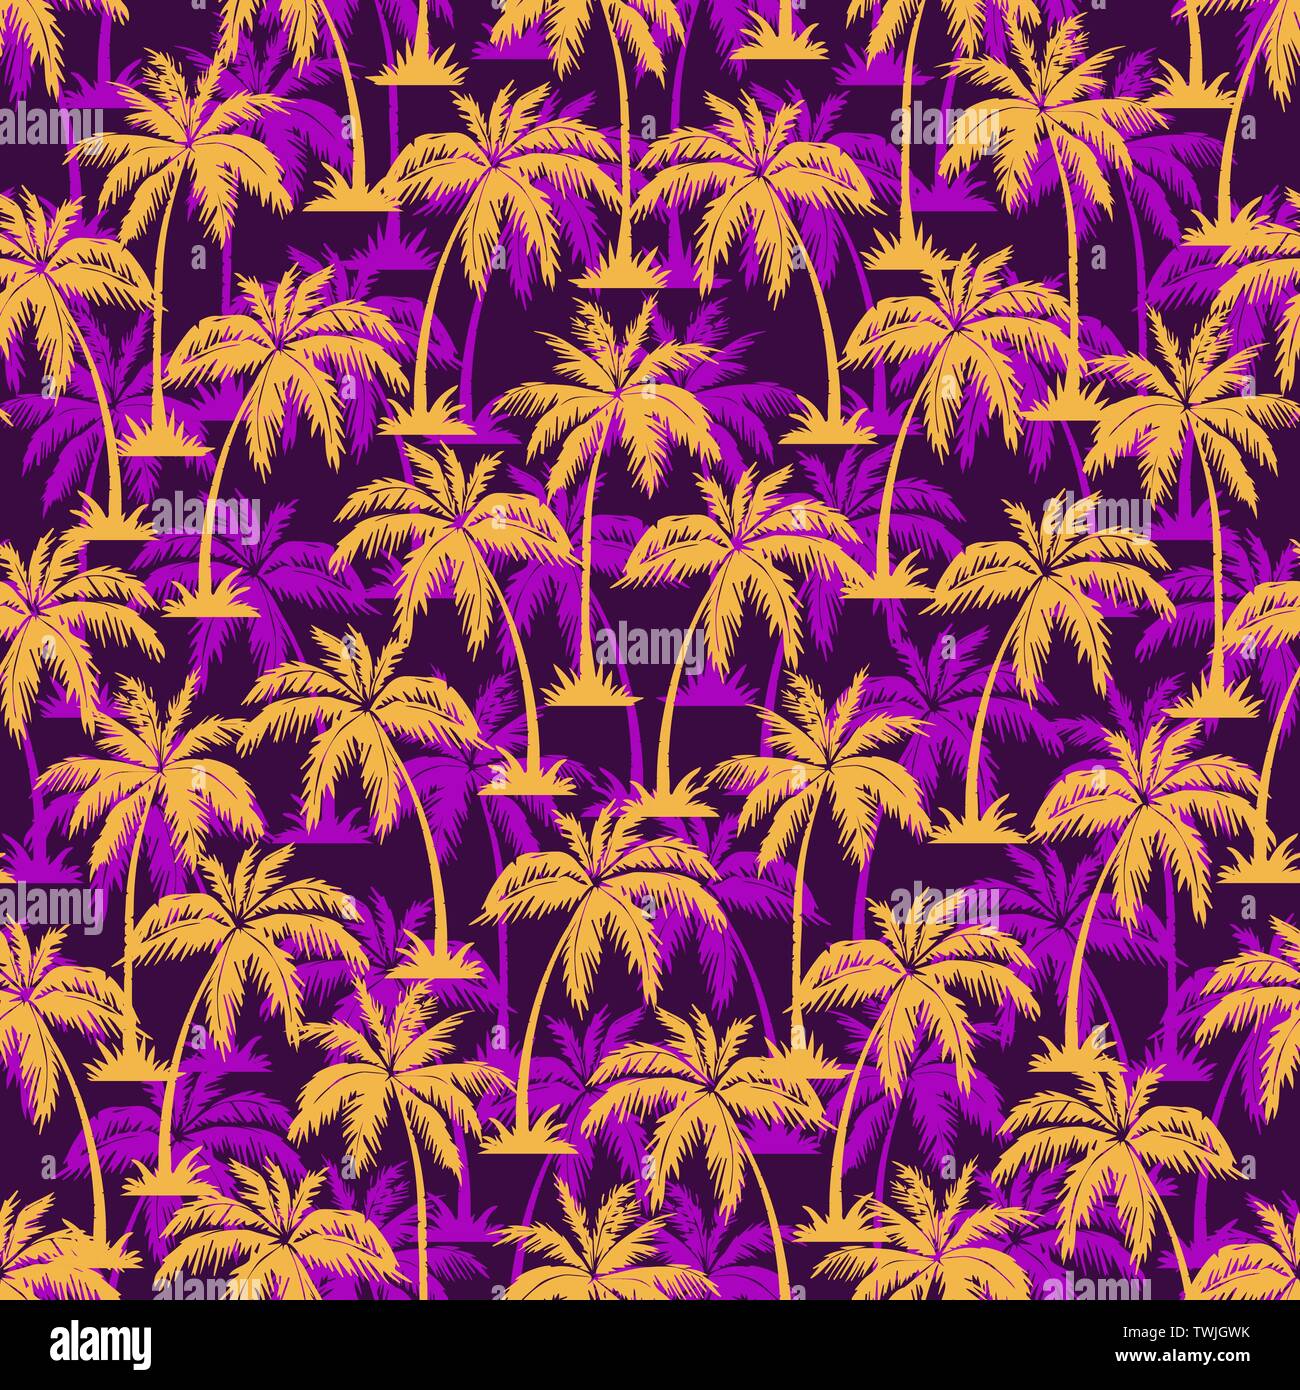 Palm tree seamless pattern. Hawaiian palm trees repeating pattern. Yellow on purple background. Vector illustration. for print, textile, web, Stock Vector